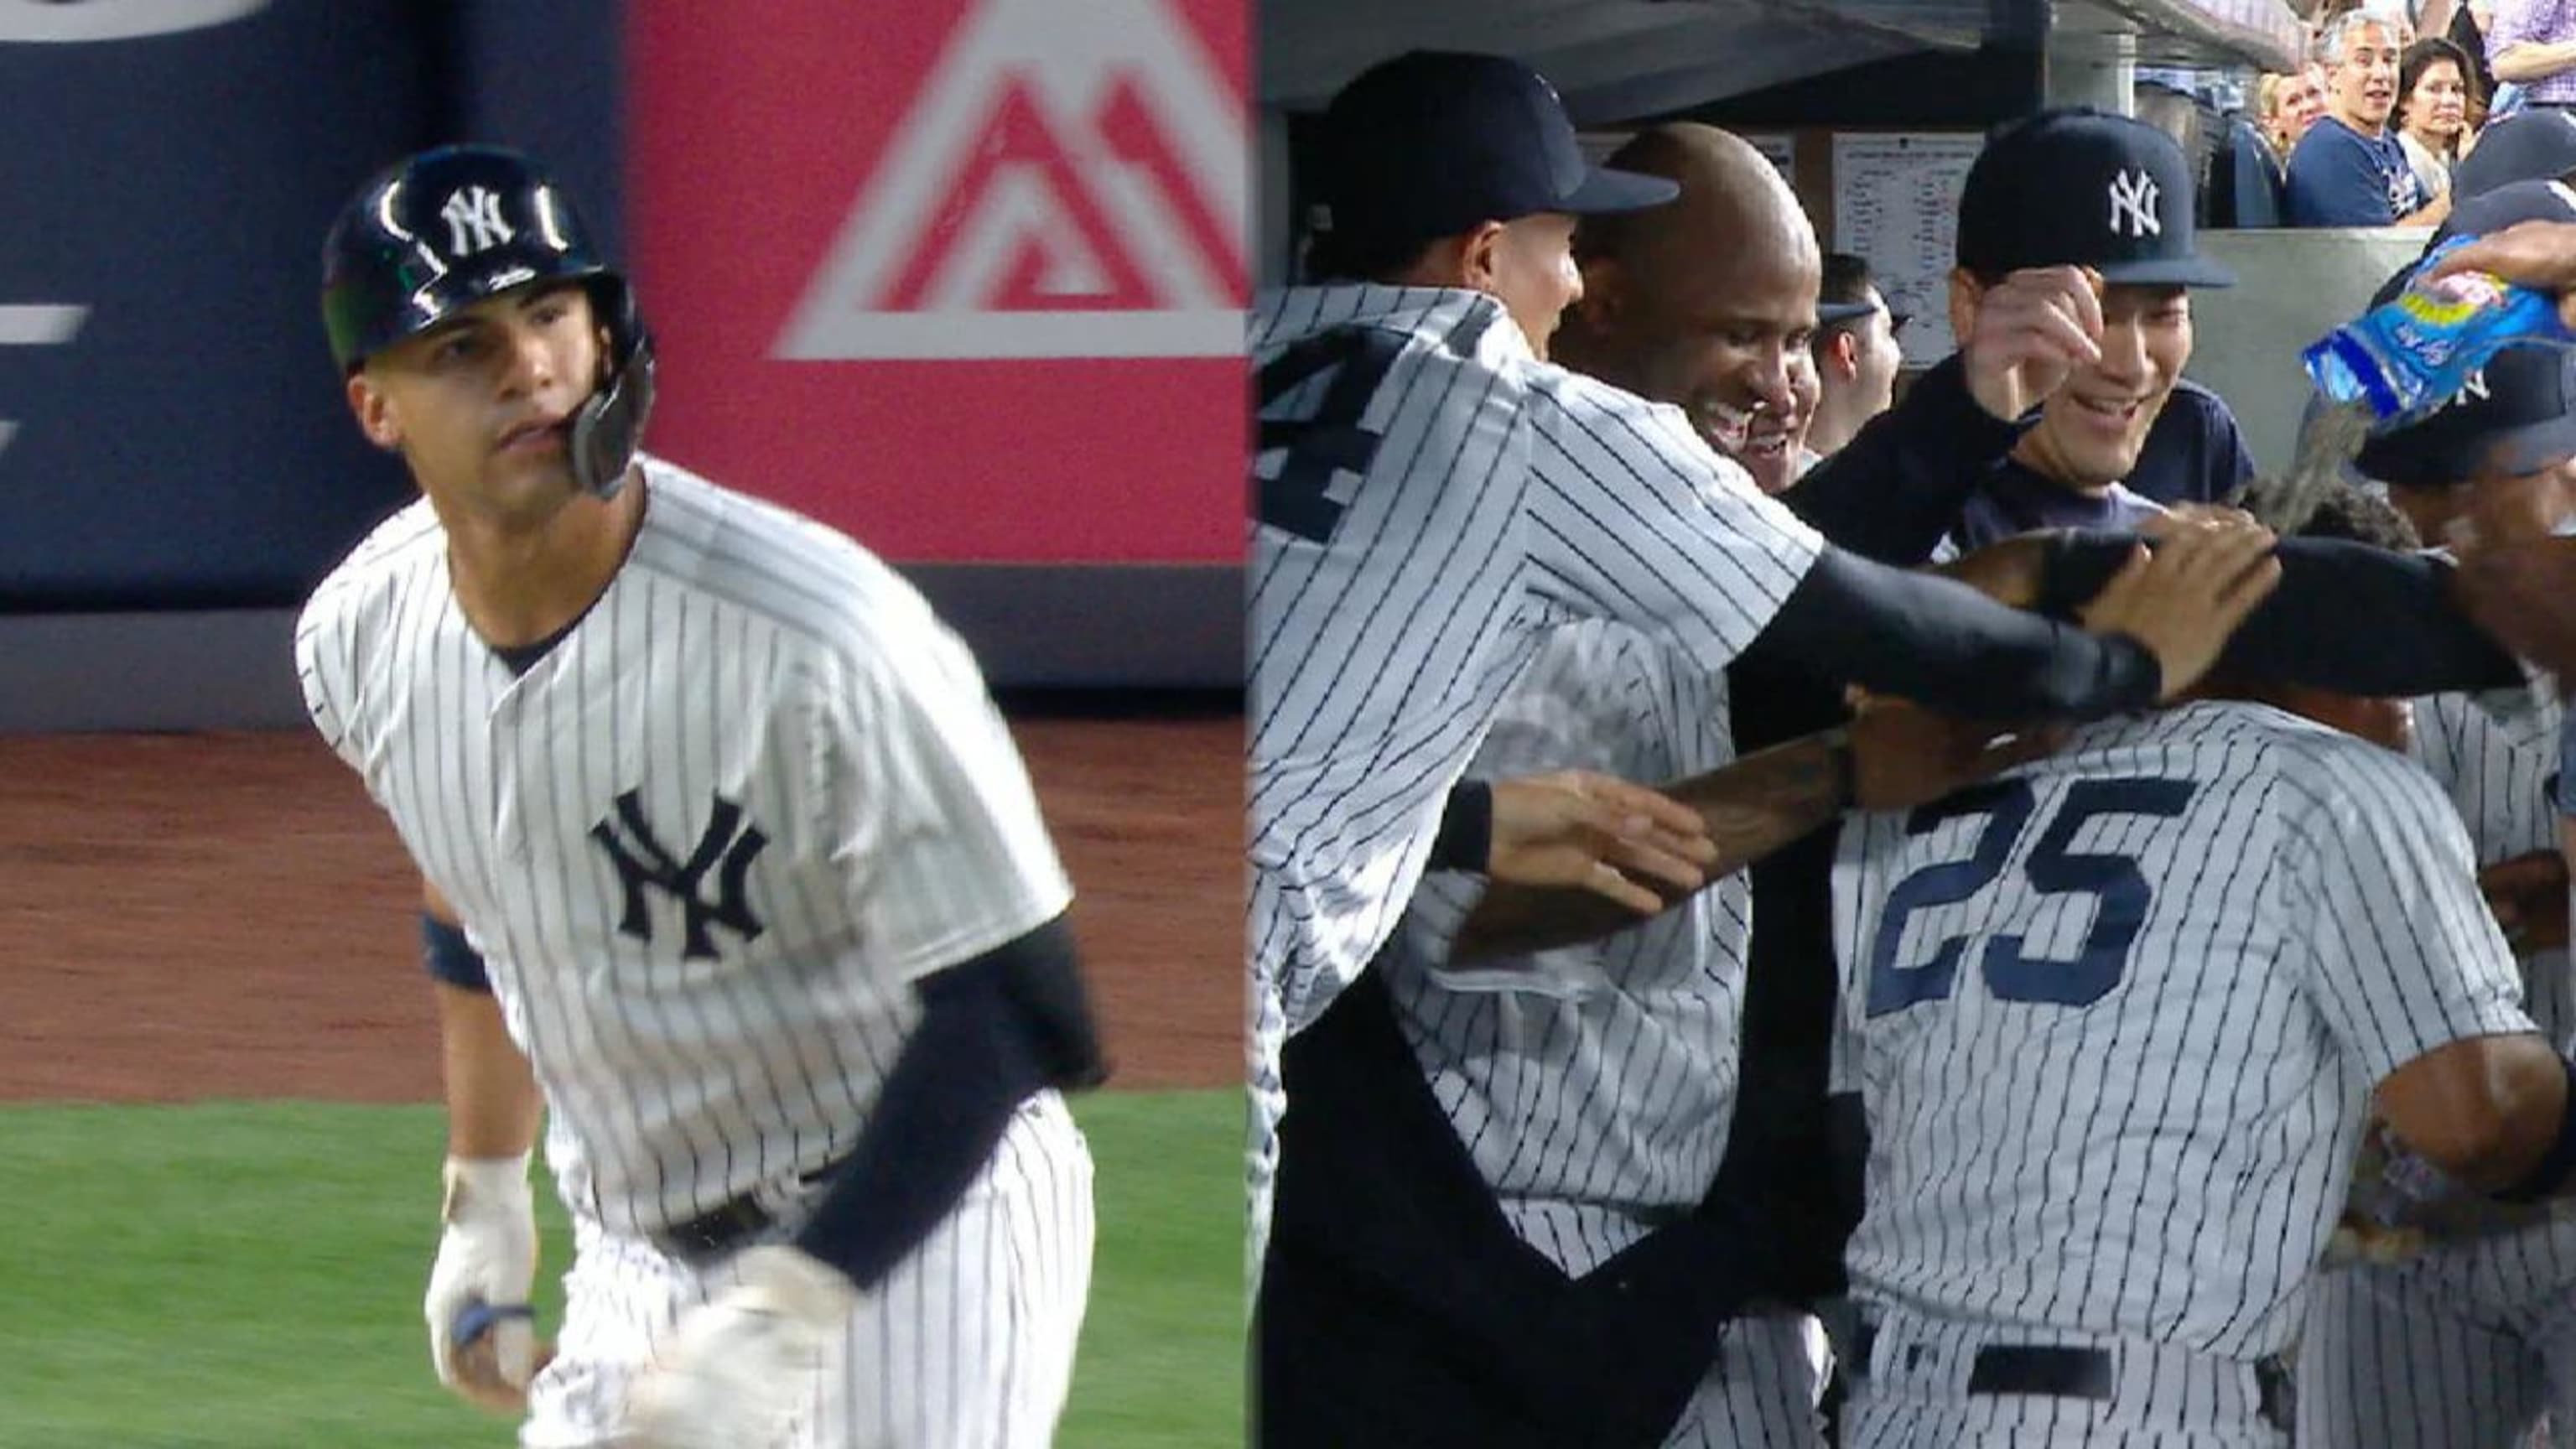 Gary Sanchez and Gleyber Torres clobber 19 homers vs. the O's so far in  2019 